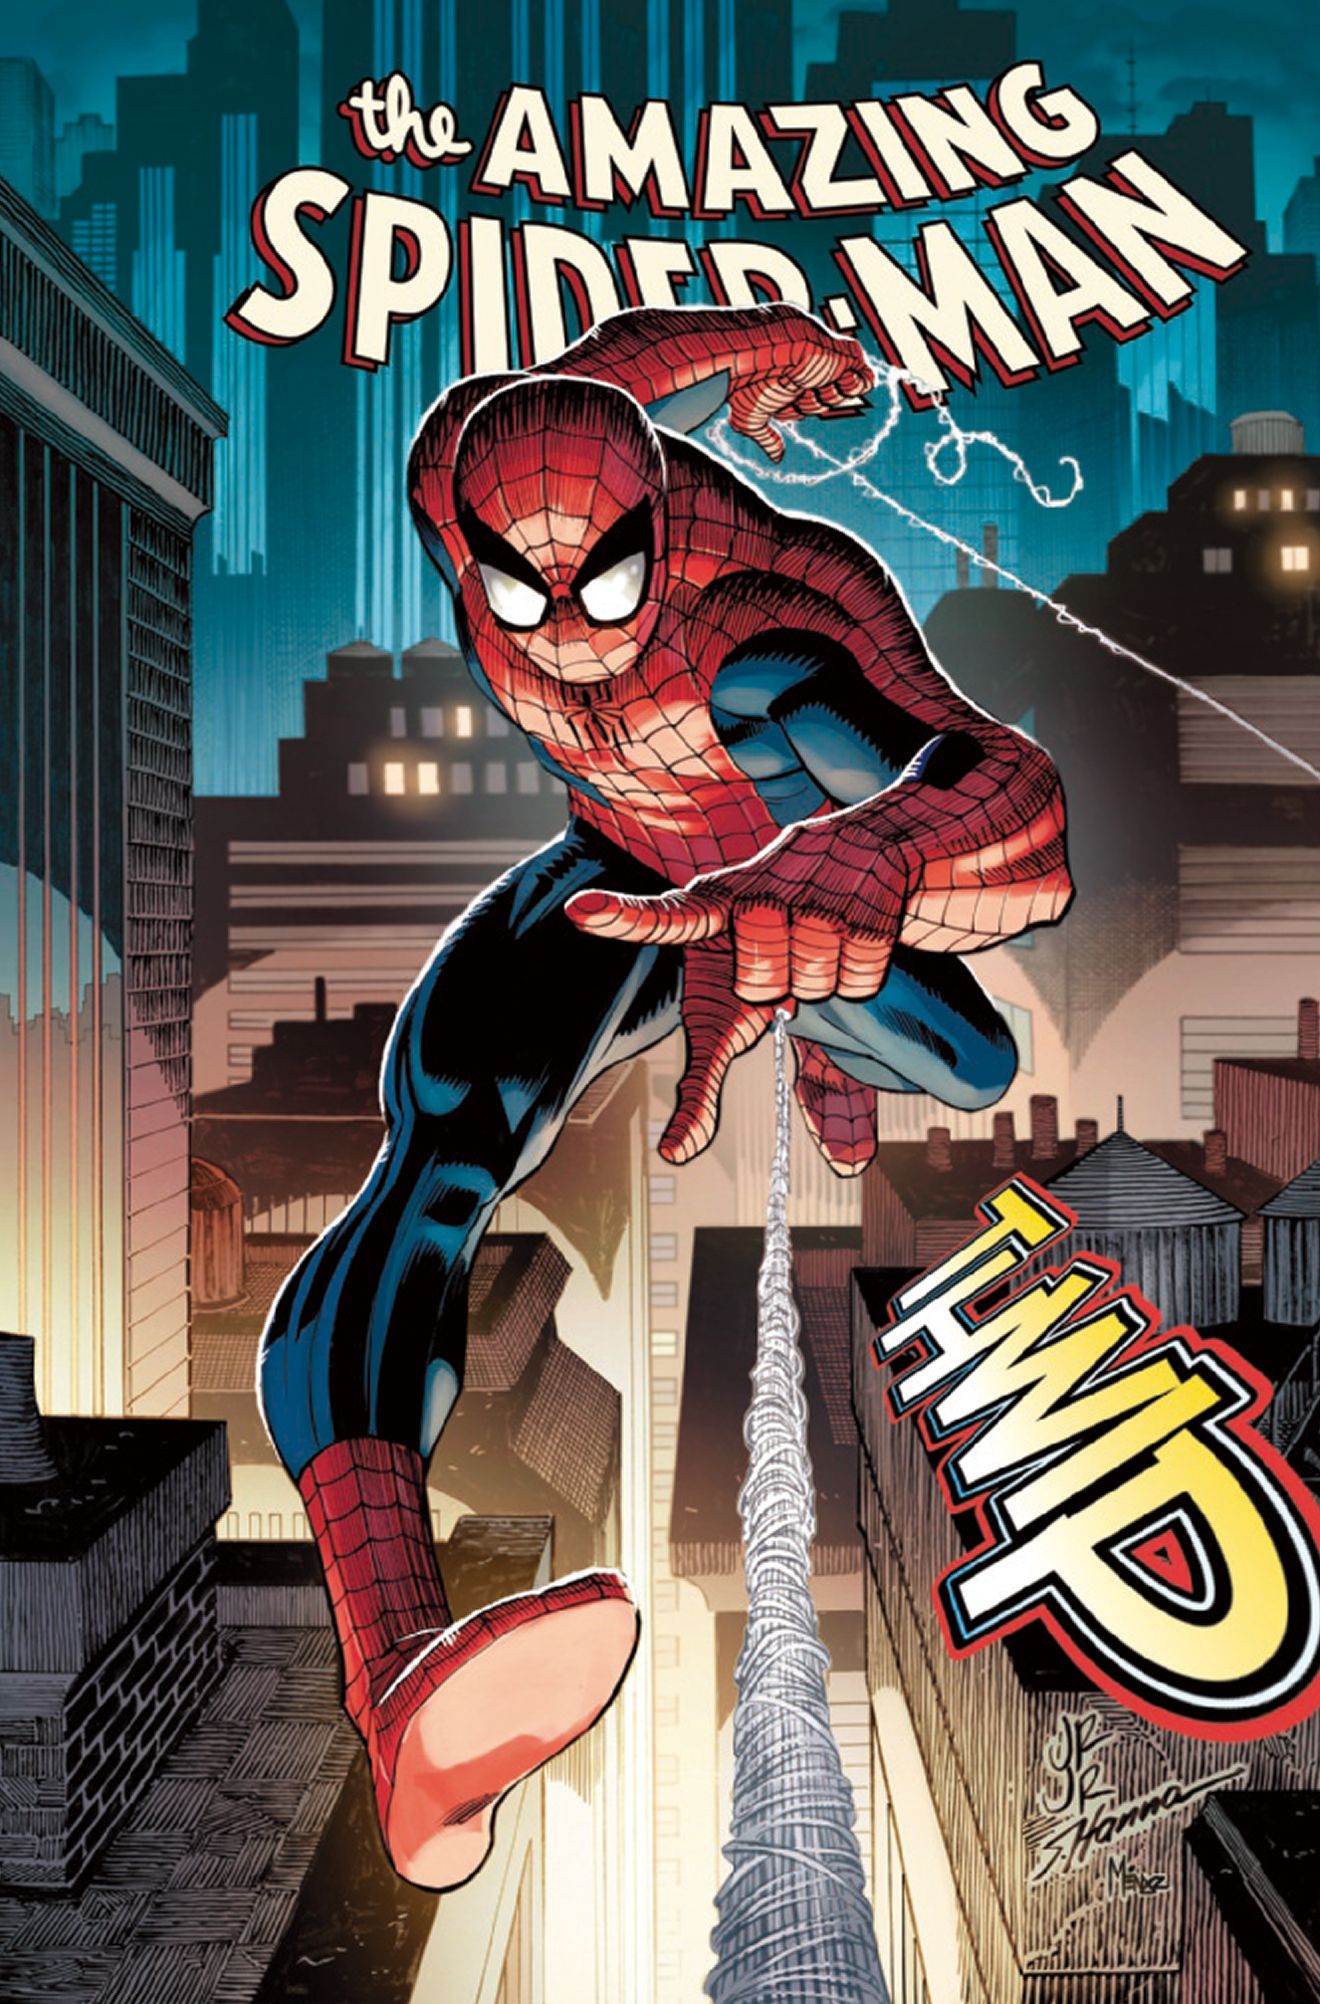 Marvels The Amazing SpiderMan #1 Comic Review